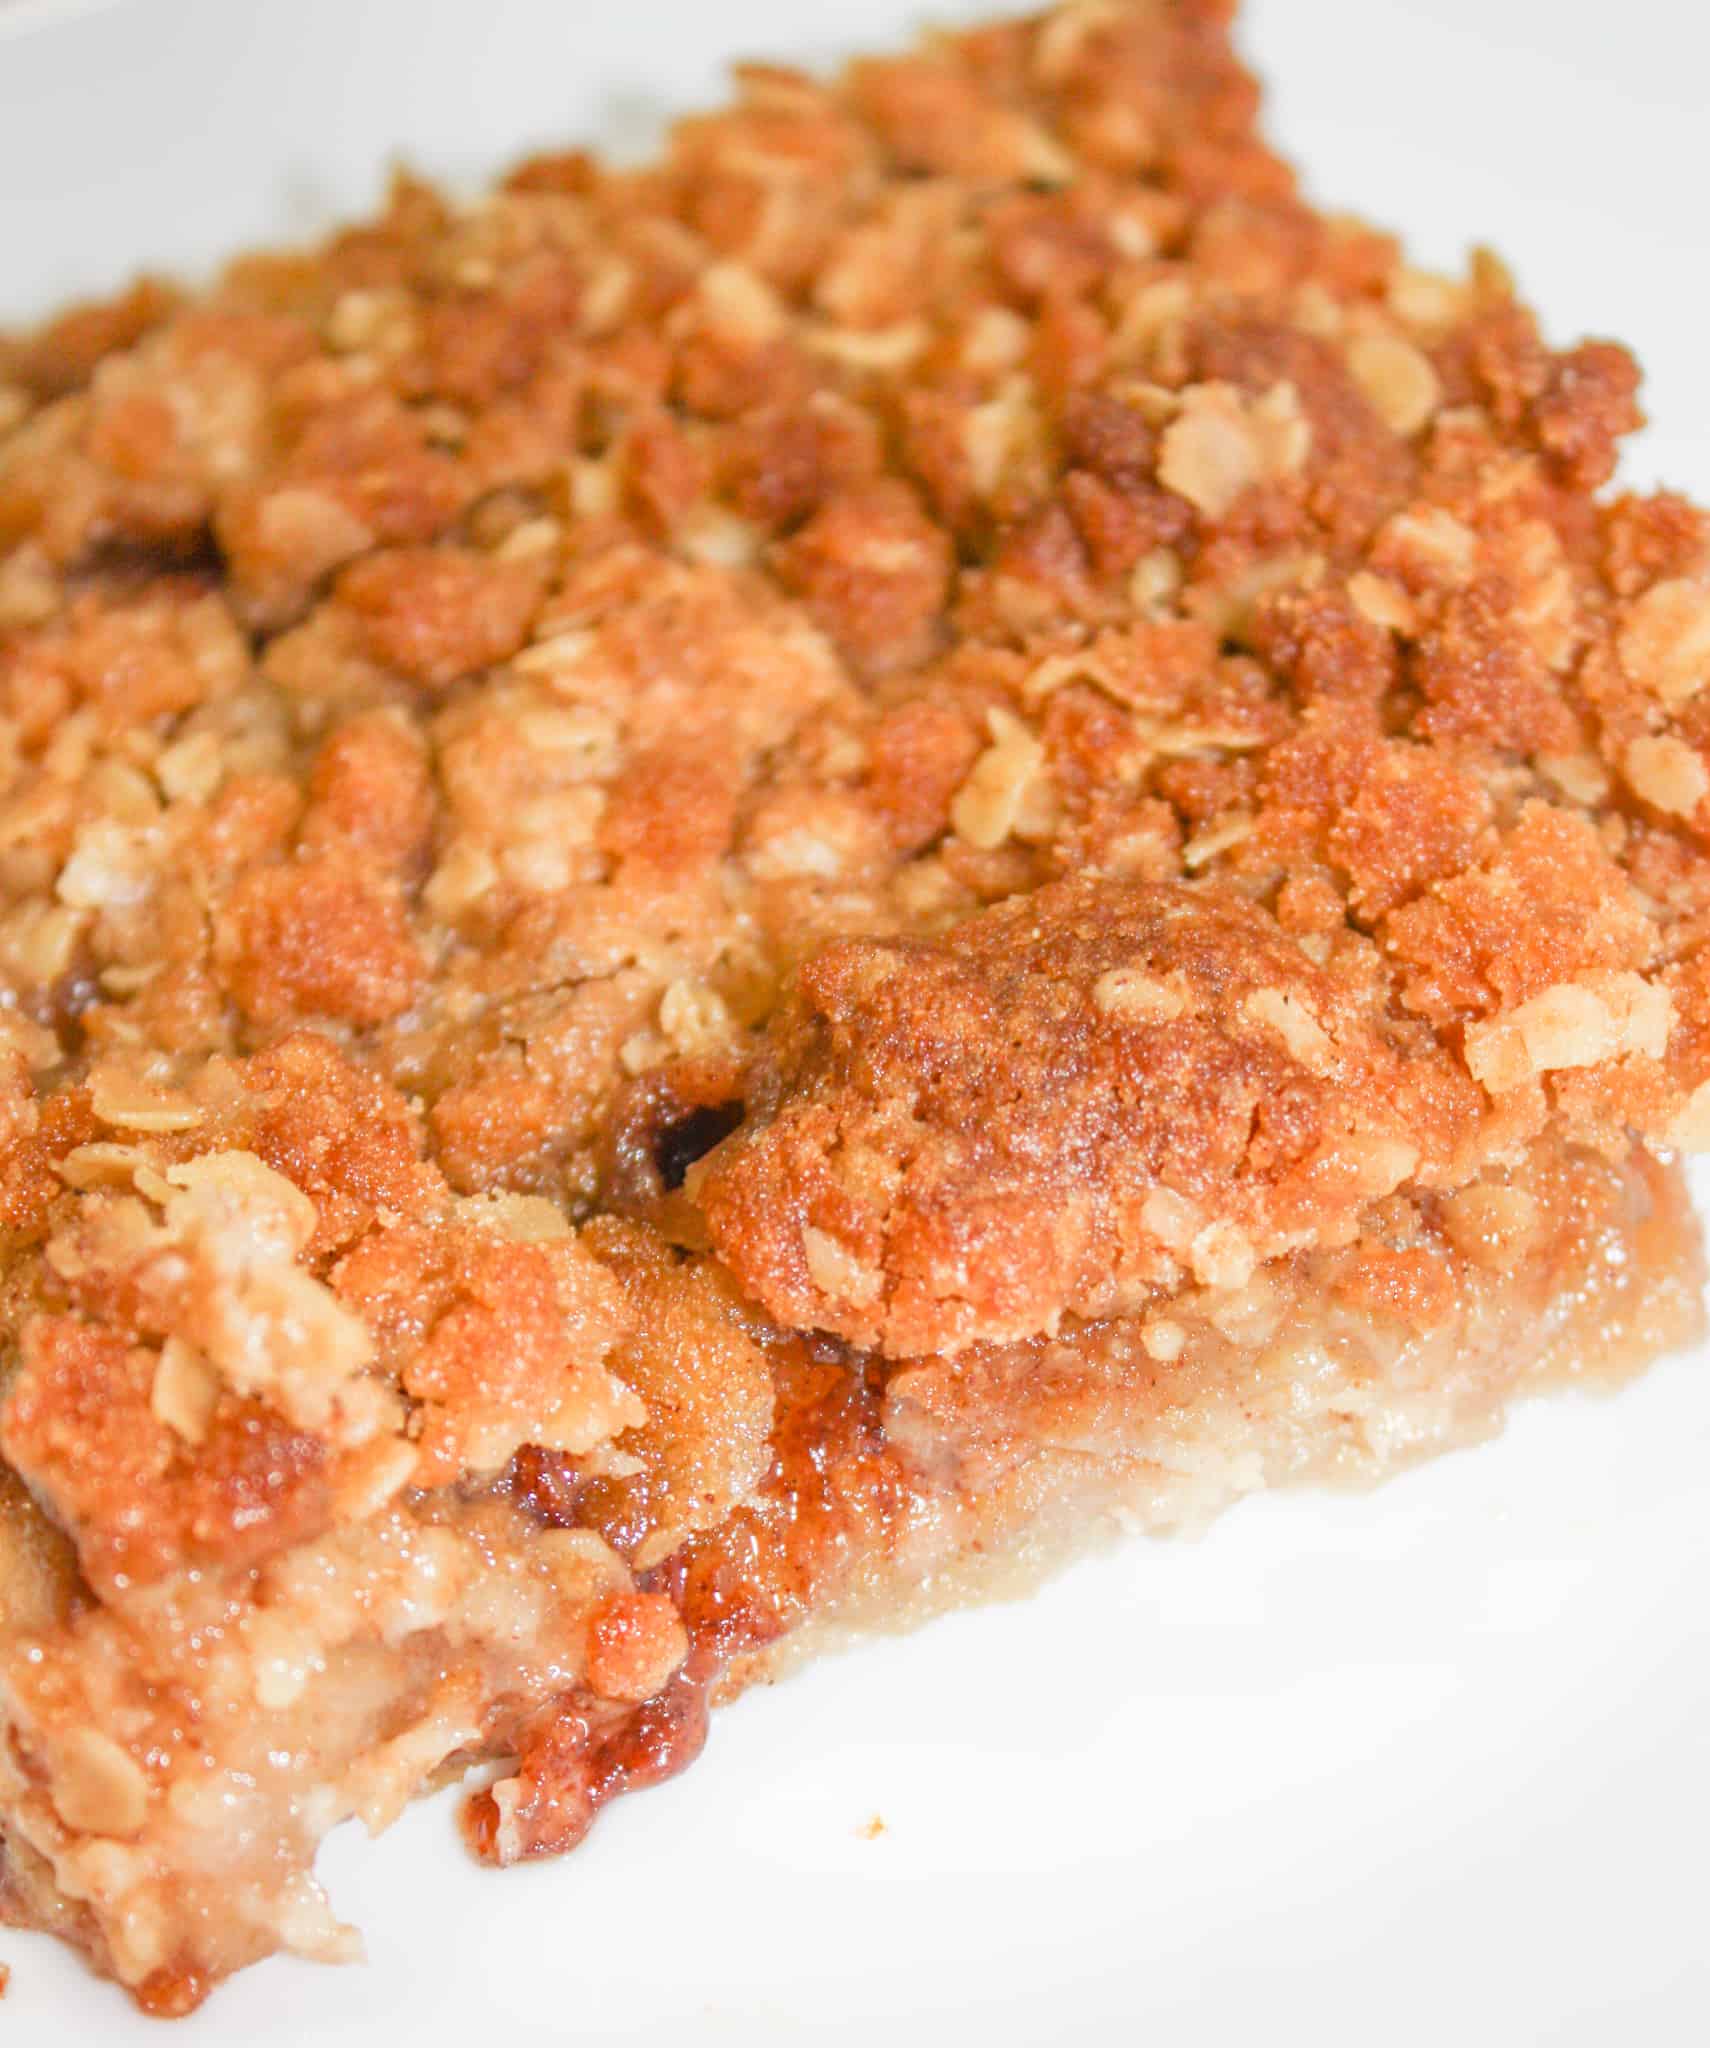 Apple Crisp is a classic fall dessert.  This gluten free version will not disappoint and will be enjoyed by all whether or not they need to avoid gluten.